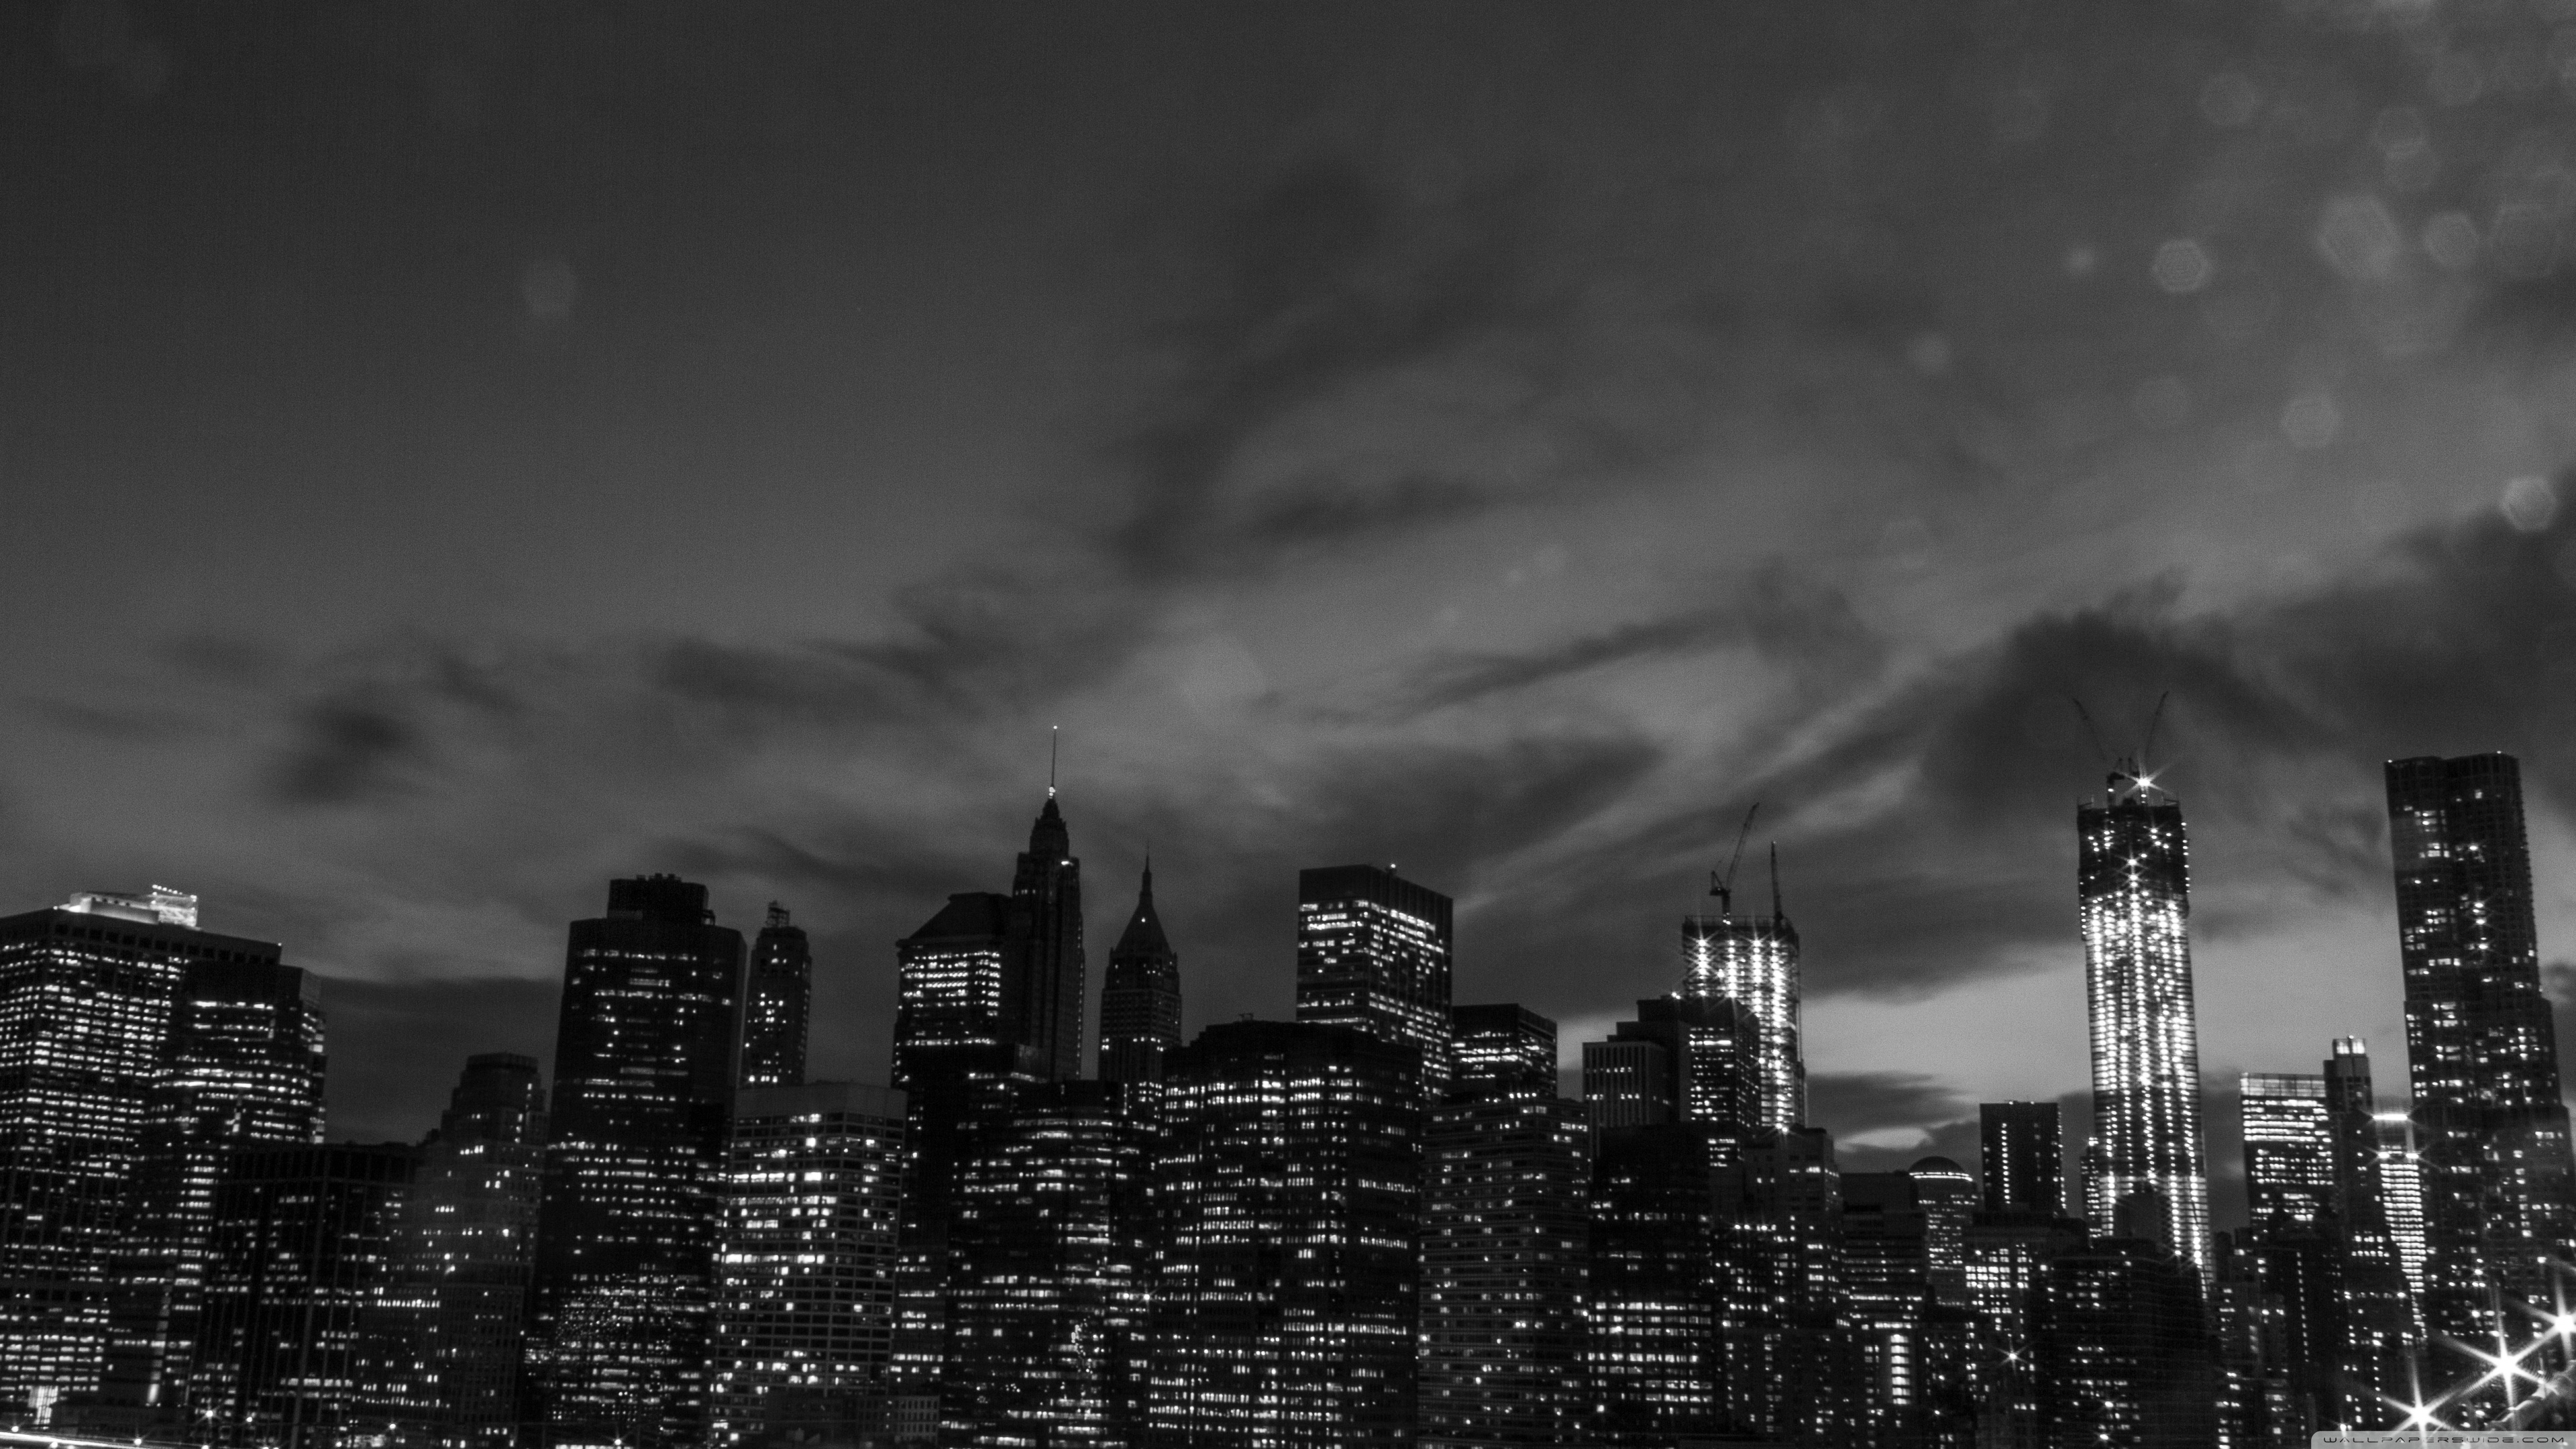 New York City Black And White At Night Ultra HD Desktop Background Wallpaper for: Widescreen & UltraWide Desktop & Laptop, Multi Display, Dual Monitor, Tablet